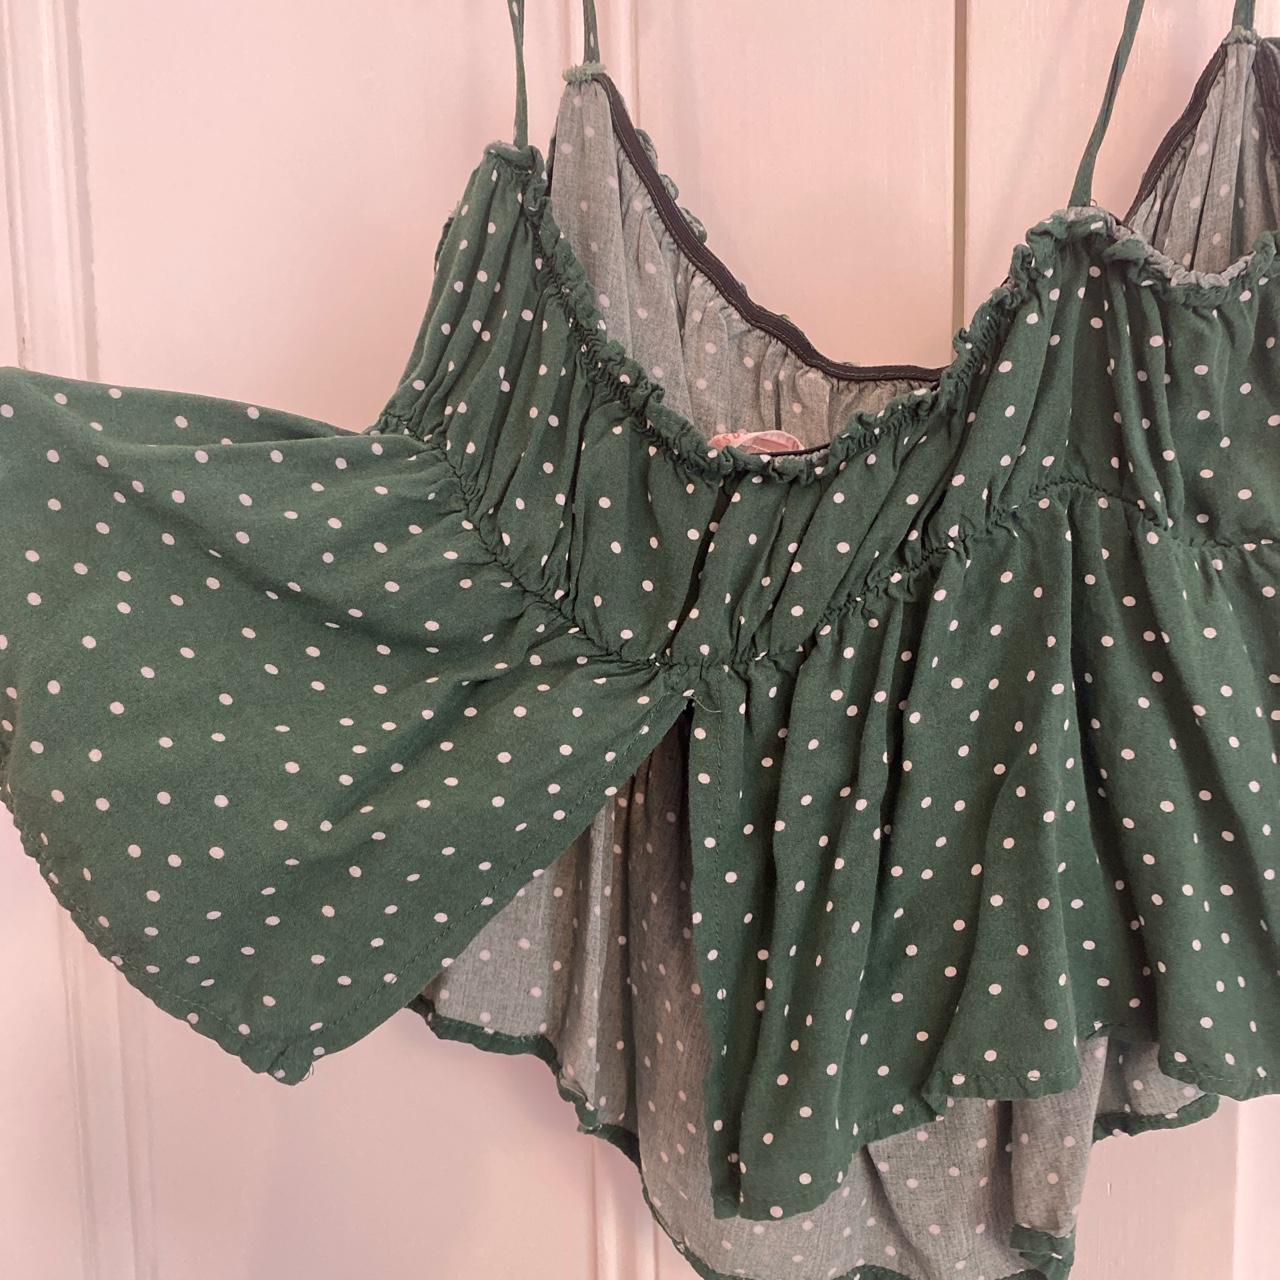 Product Image 3 - green polka dot flowy top

has